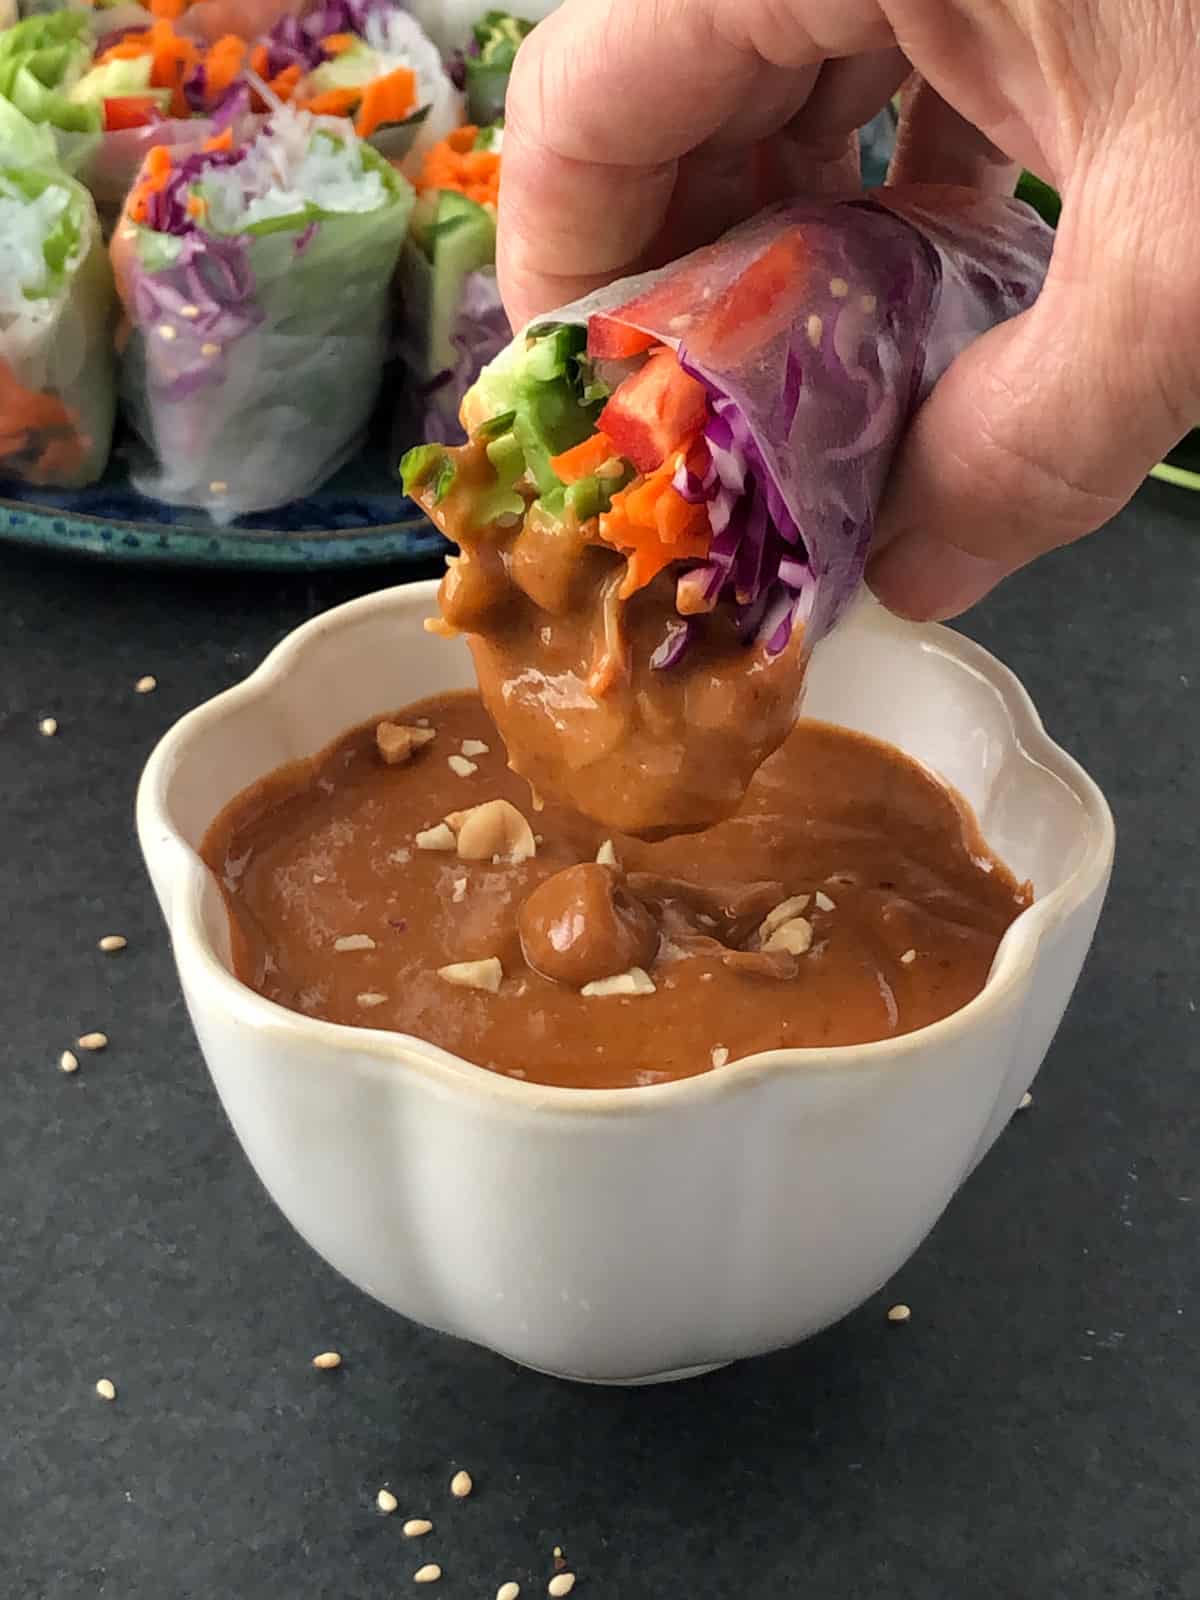 Vegetarian salad roll being dipped in peanut sauce.